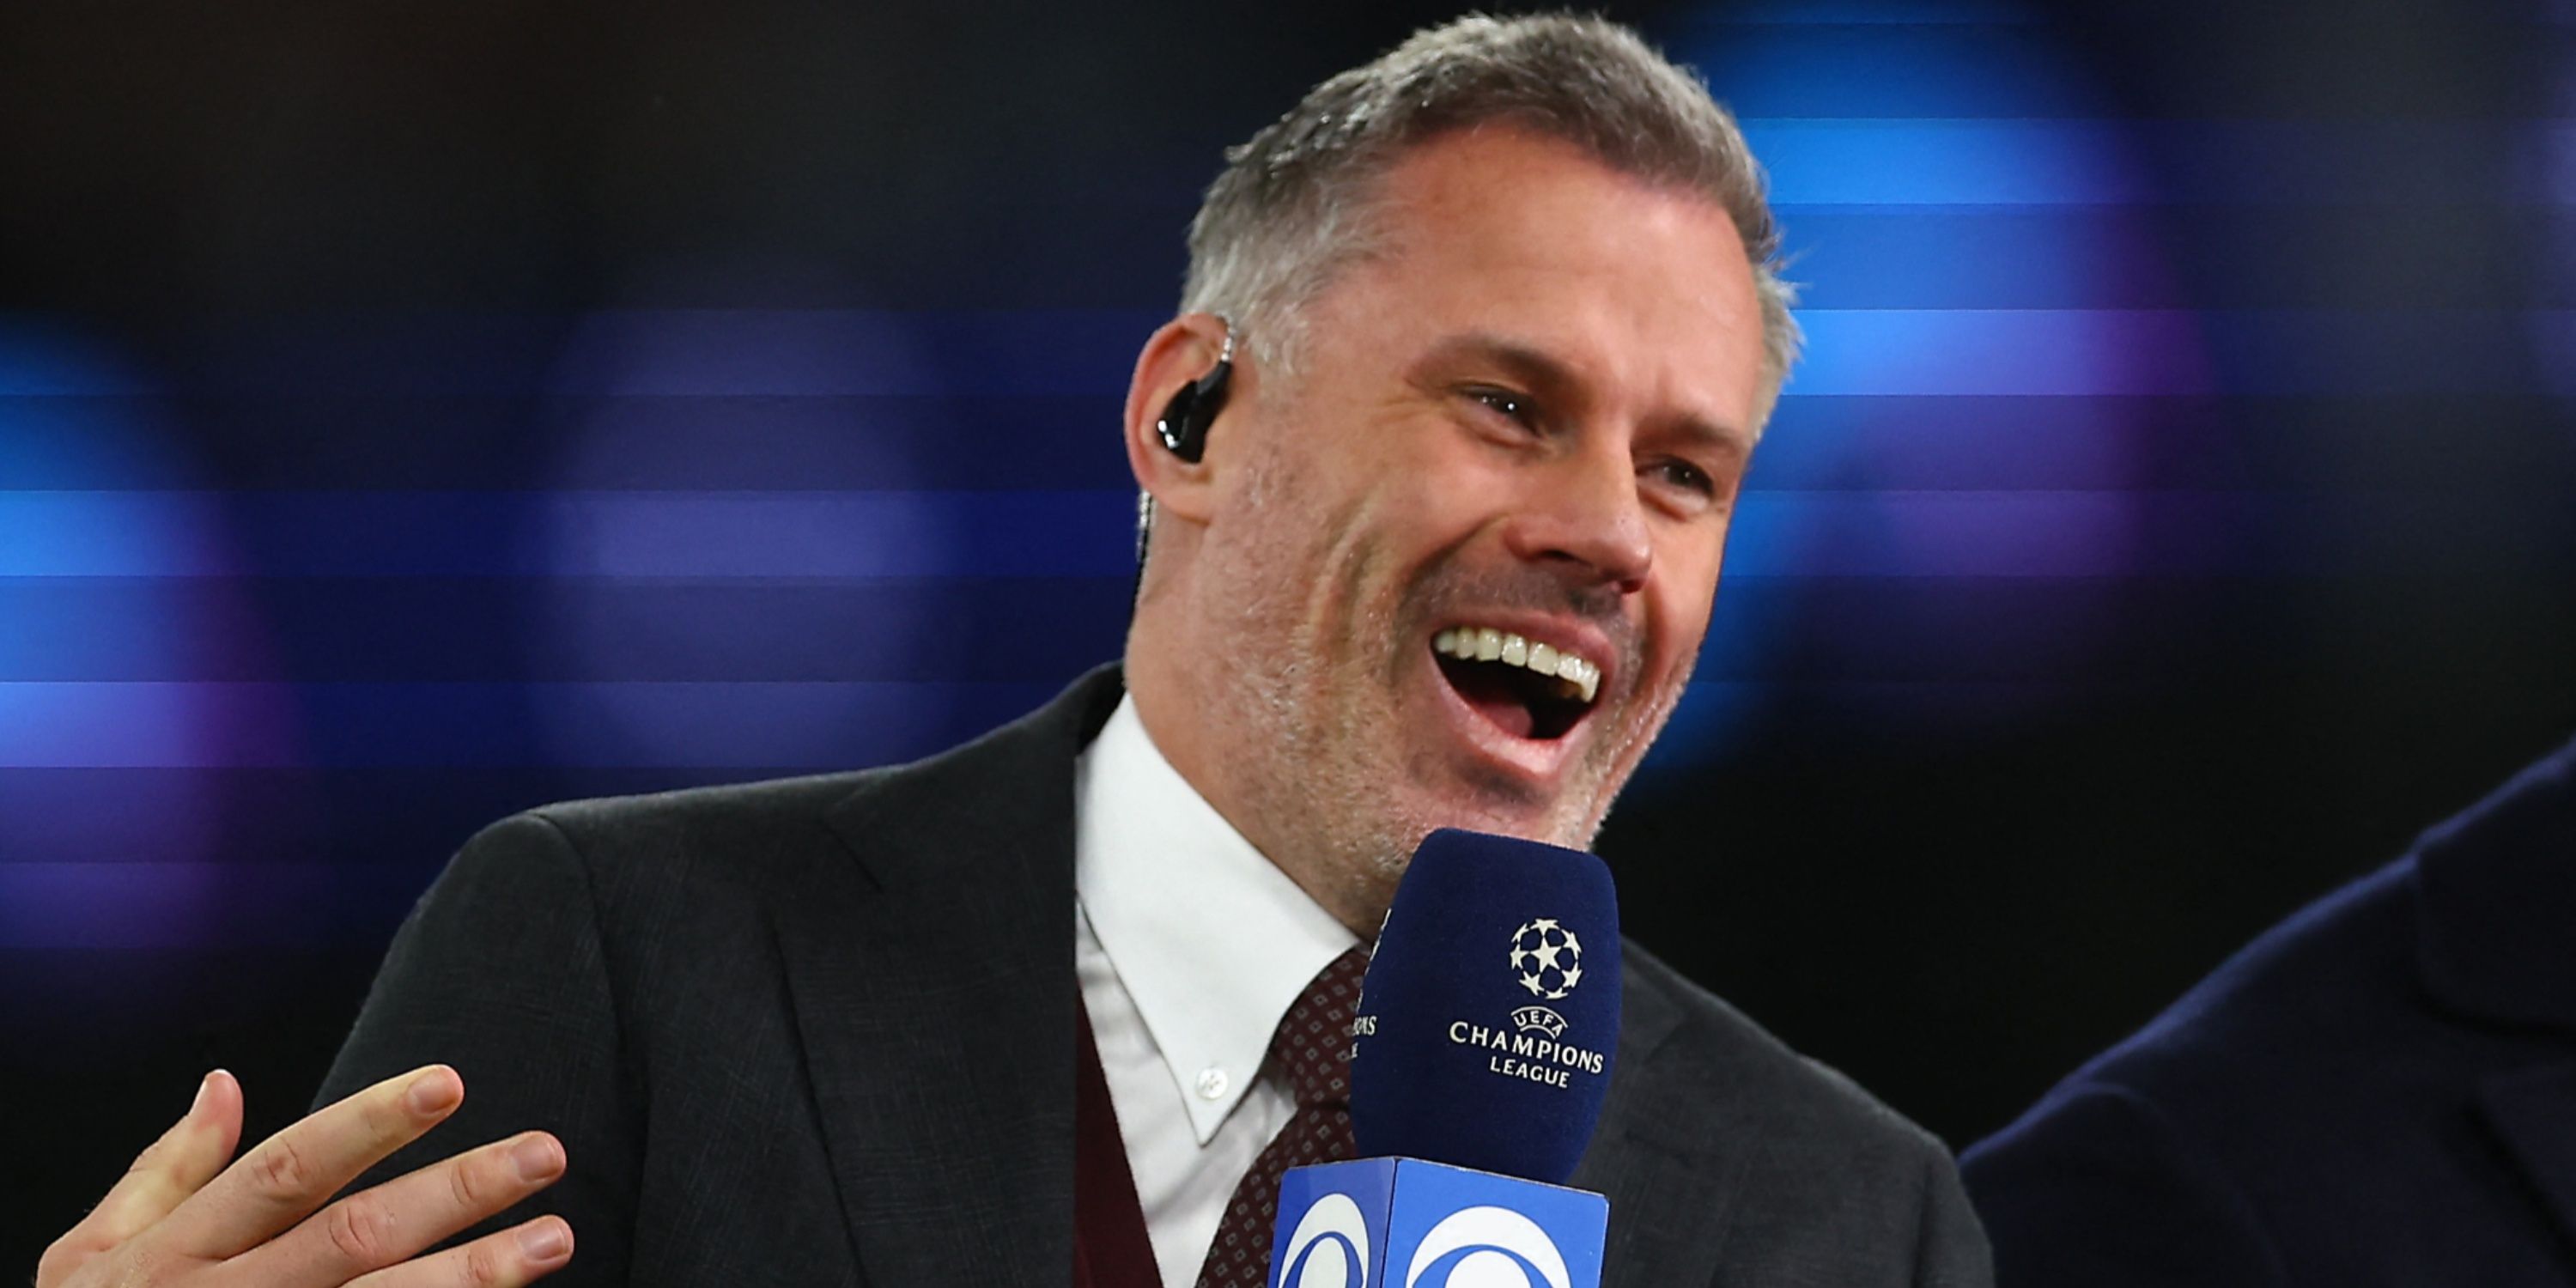 Jamie Carragher had perfect response after Man Utd hero Peter Schmeichel tried to roast him